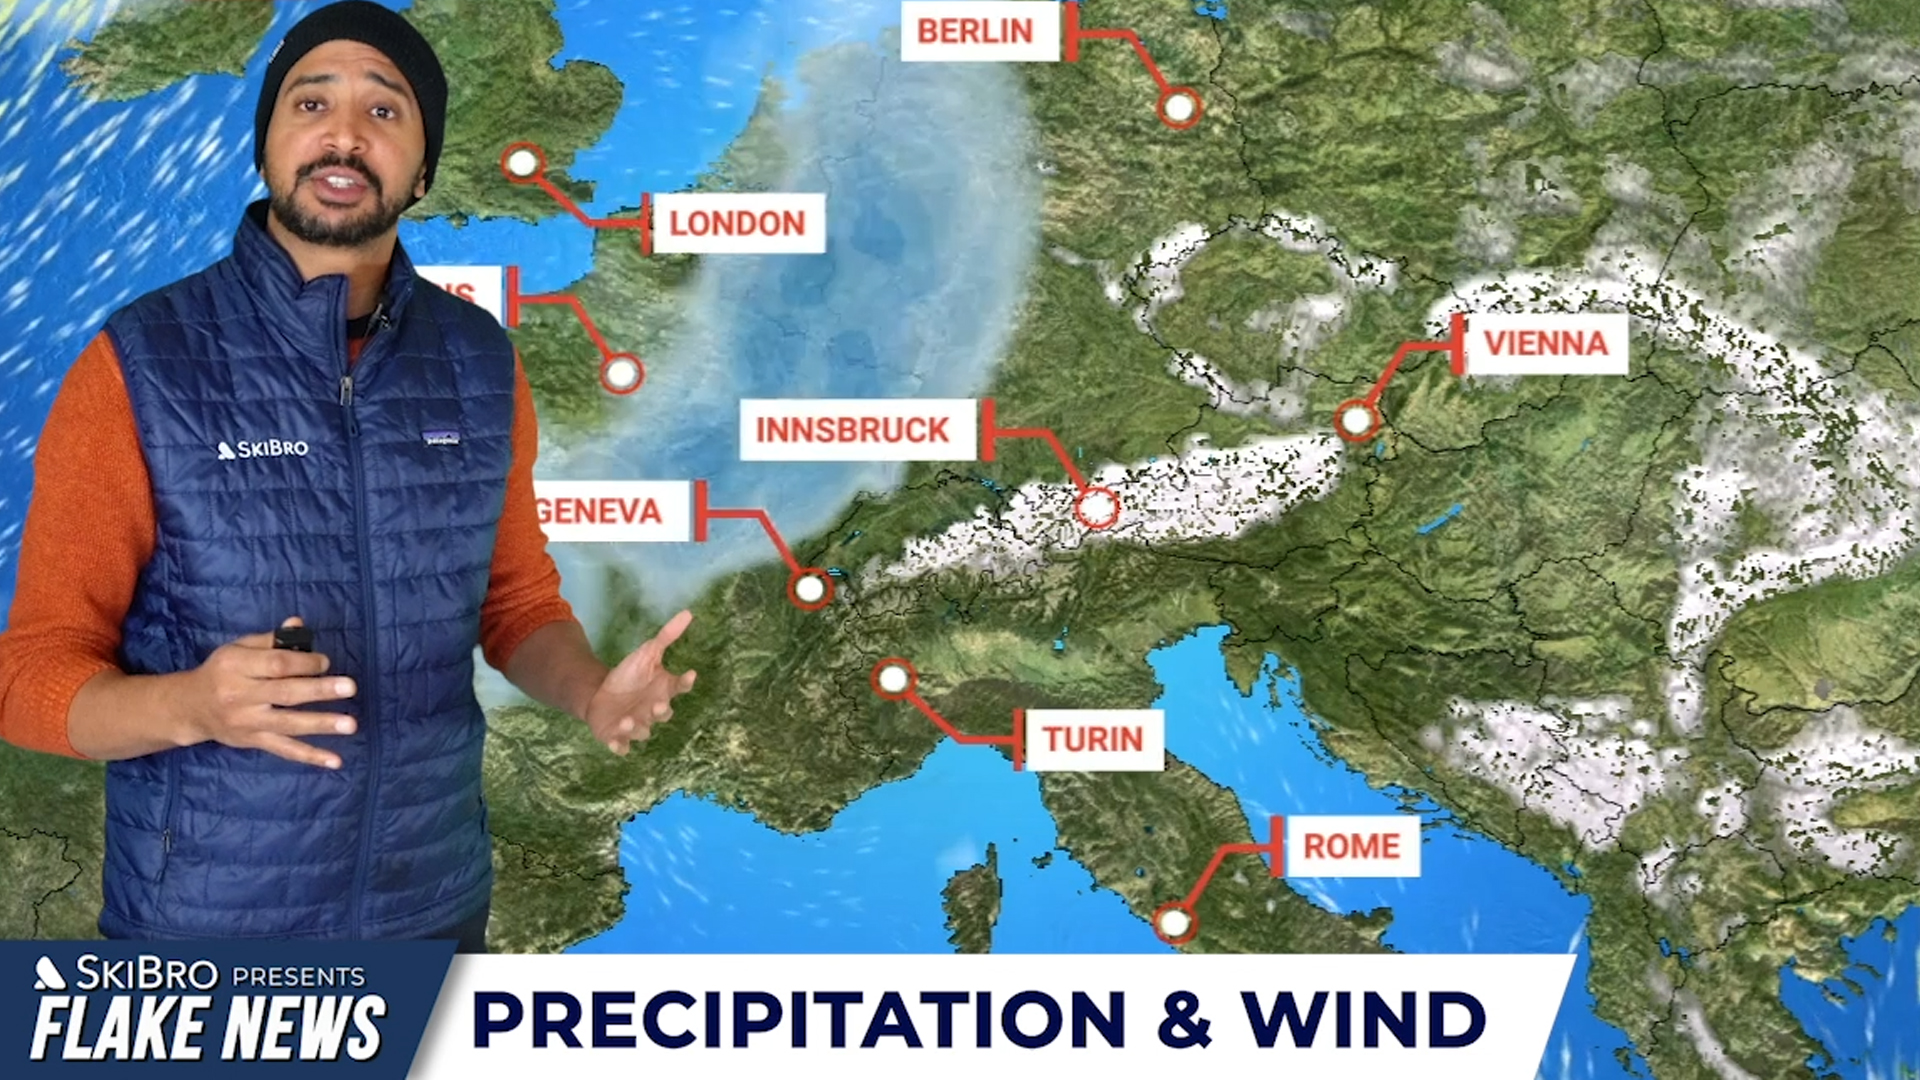 Man stands in front of snow and weather forecast map